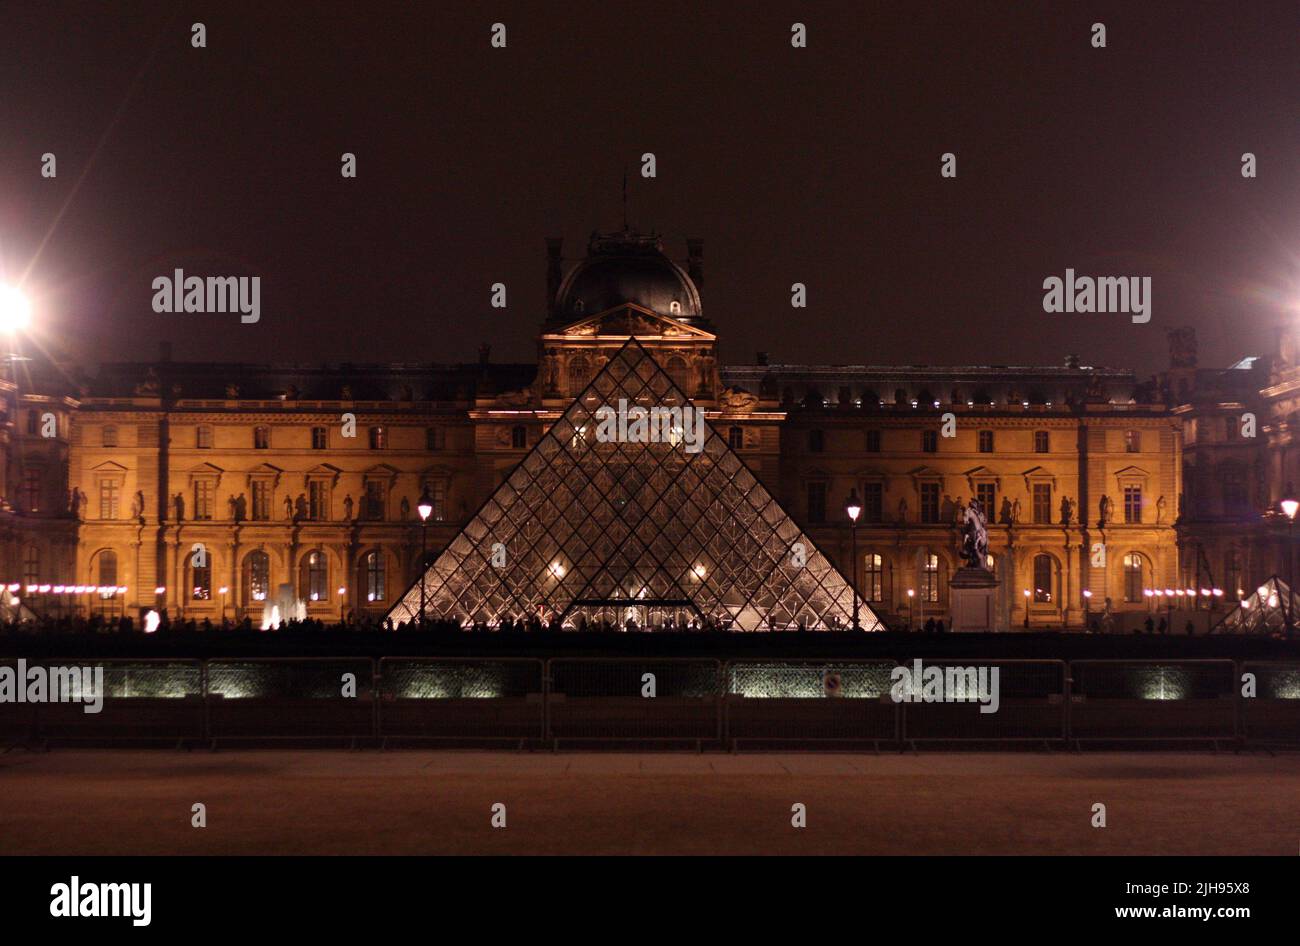 The Louvre Pyramid museum in Paris, France. Stock Photo